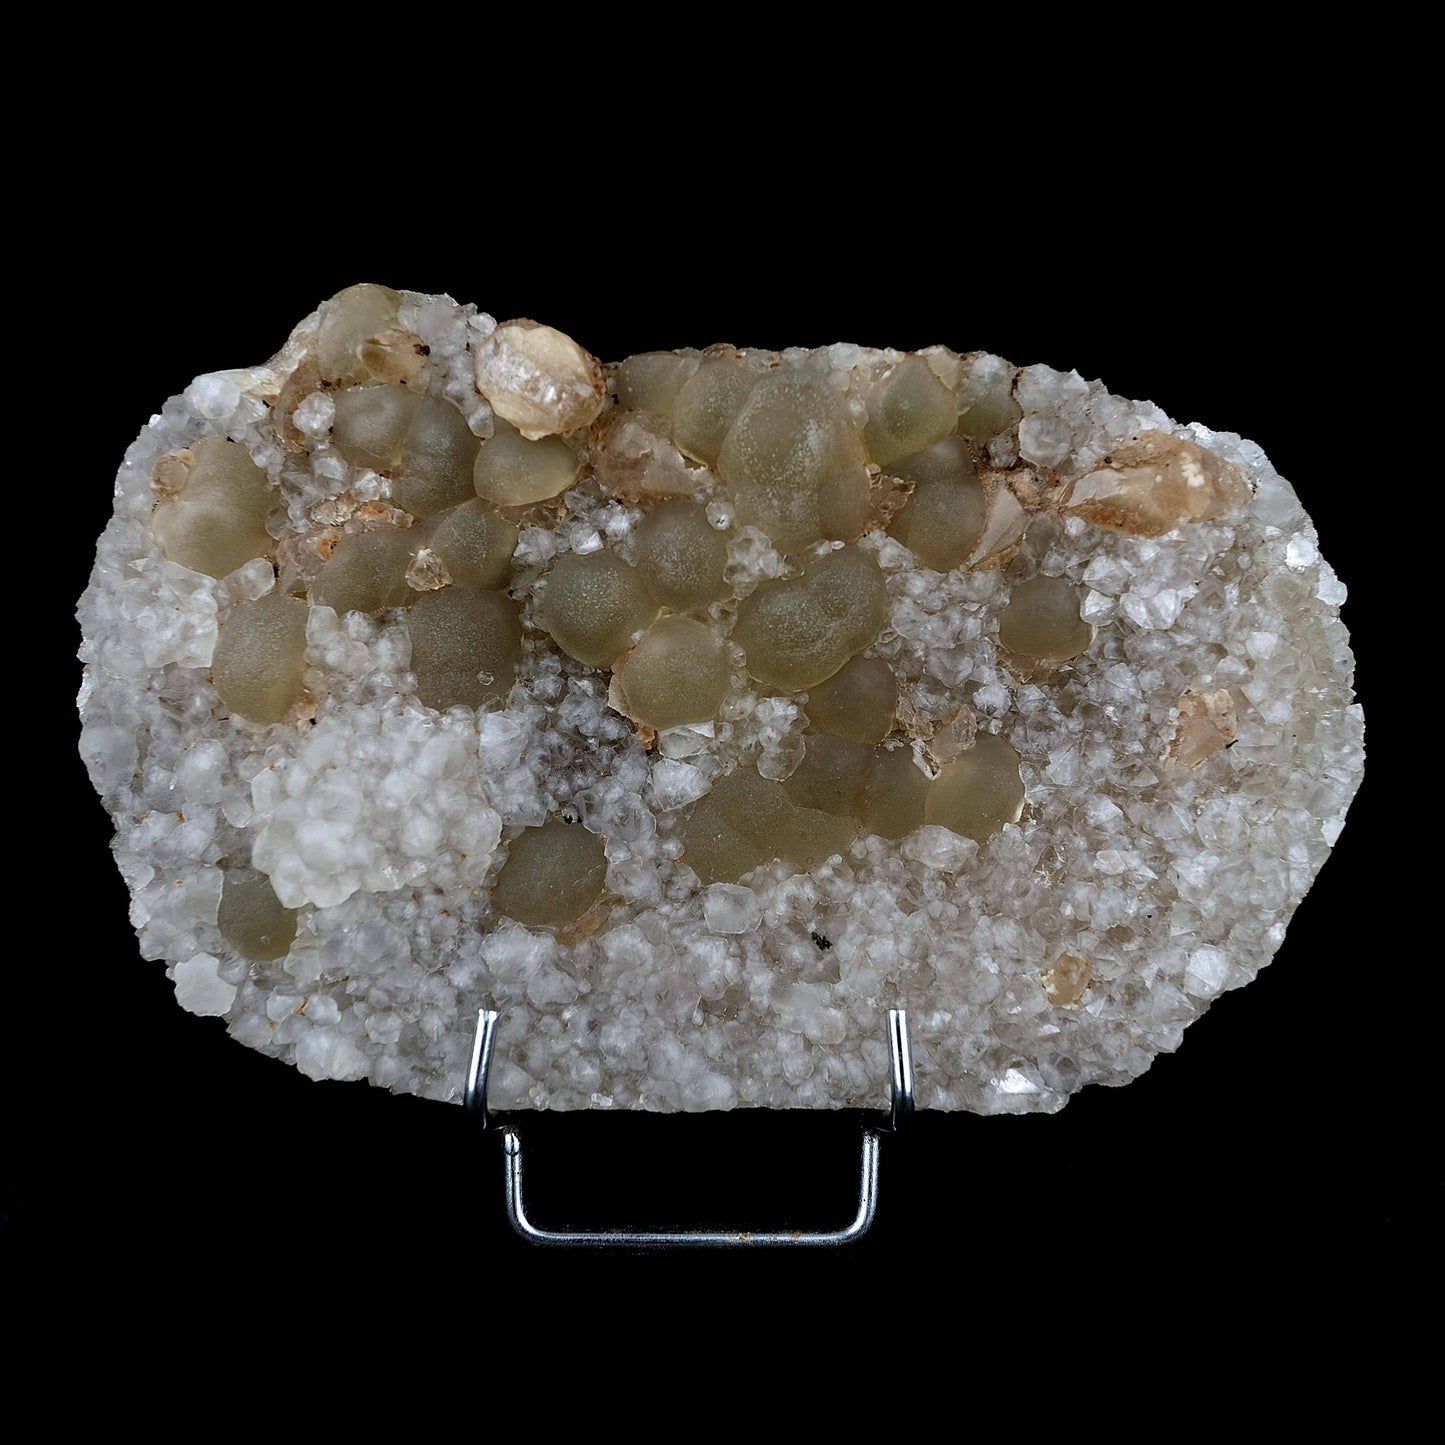 Fluorite Botryoidal on MM Quartz Plate Natural Mineral Specimen # B 39…  https://www.superbminerals.us/products/fluorite-botryoidal-on-mm-quartz-plate-natural-mineral-specimen-b-3976  Features Small, botryoidal fluorite crystals, ranging in colour from creamy to yellow, sit on a plate of quartz crystals. Usually they are half-buried. to have one stick out so nicely, and on such a balanced matrix. Primary Mineral(s): Fluorite Secondary Mineral(s): MM QuartzMatrix: N/A18 cm x 10 cm1150 GmsLocality